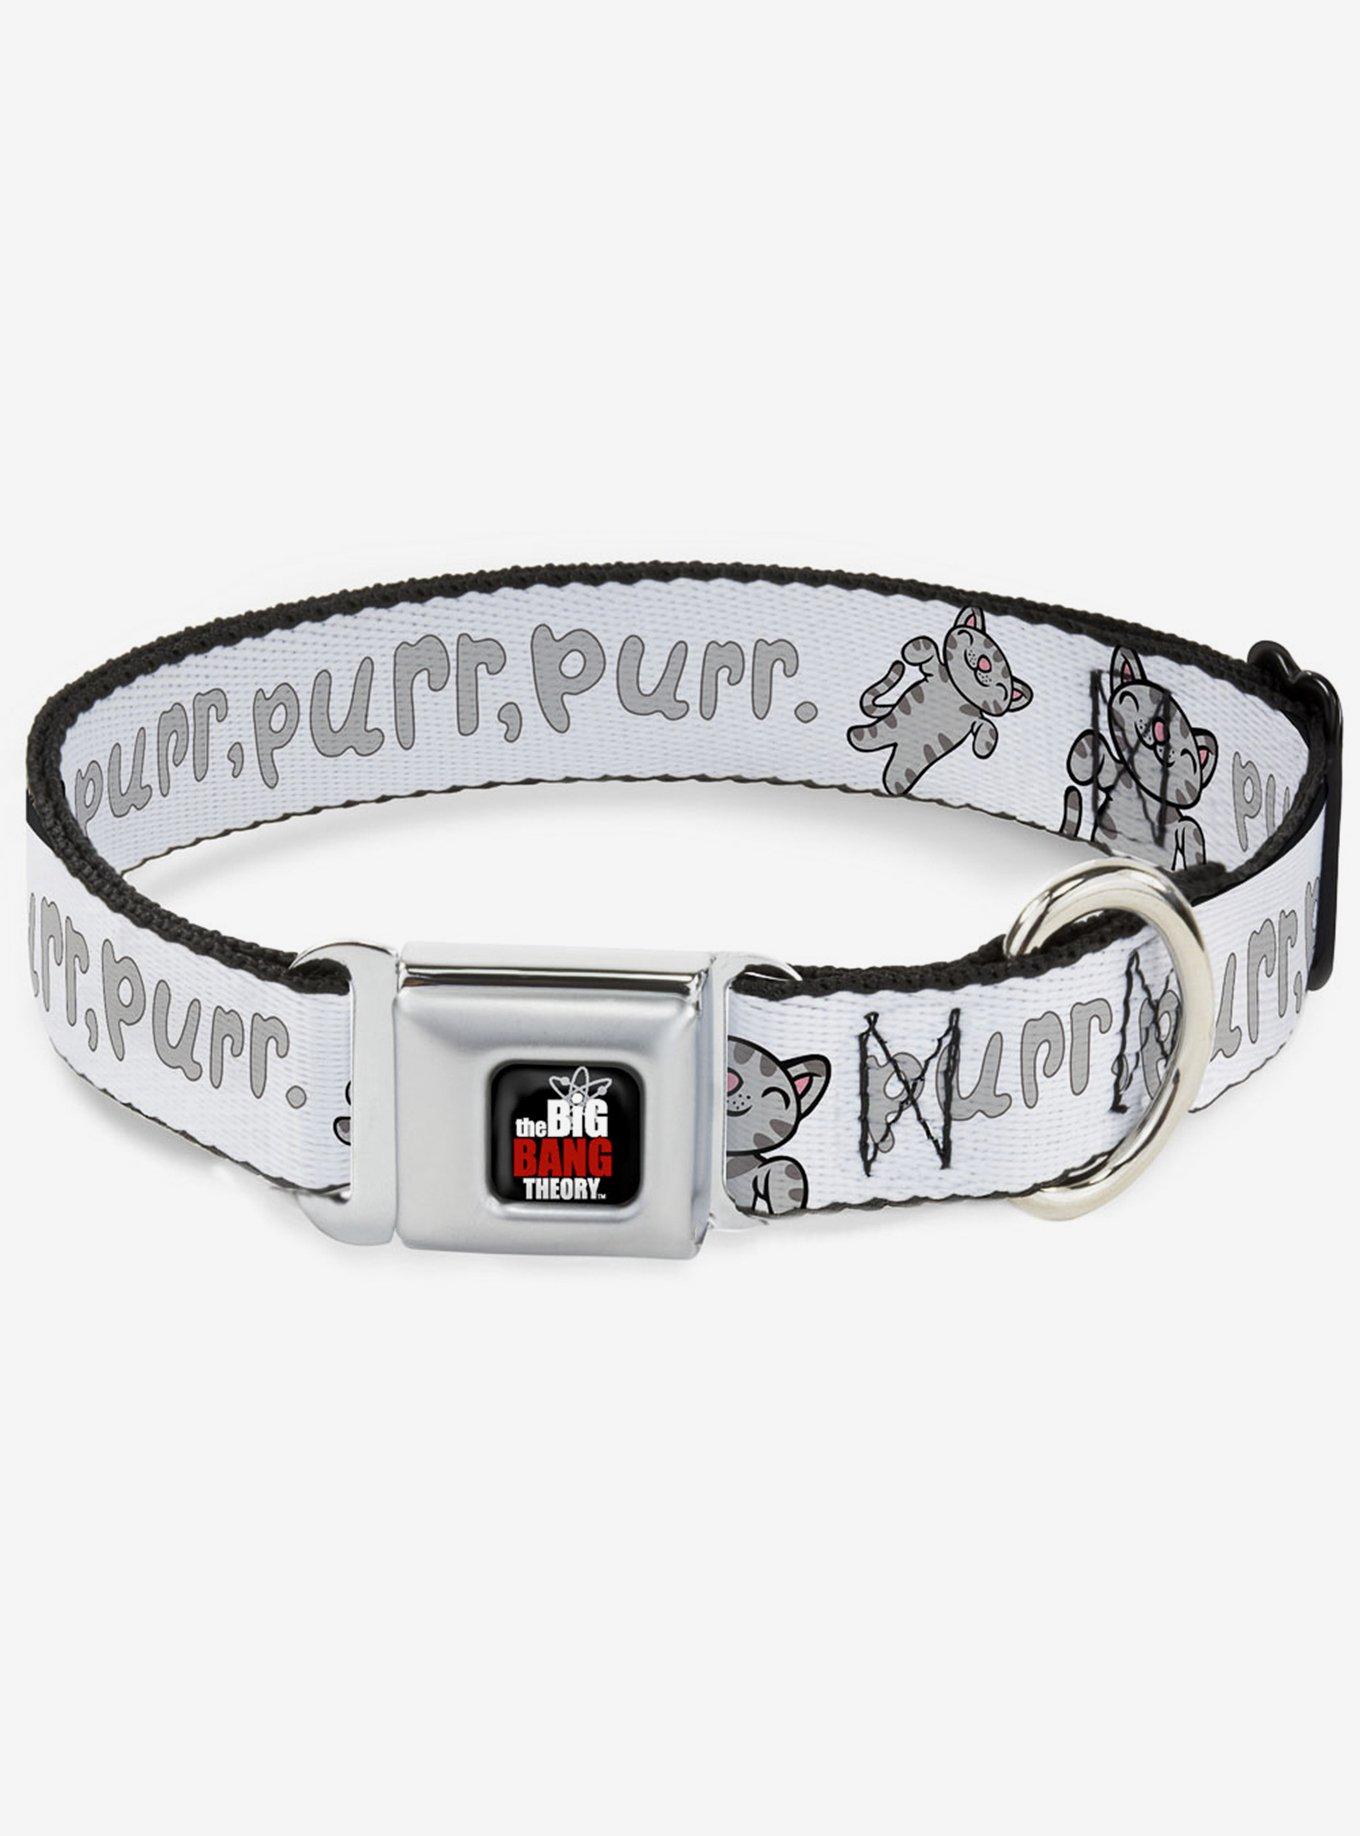 The Big Bang Theory Soft Kitty Purr Purr Purr Seatbelt Buckle Dog Collar, MULTICOLOR, hi-res